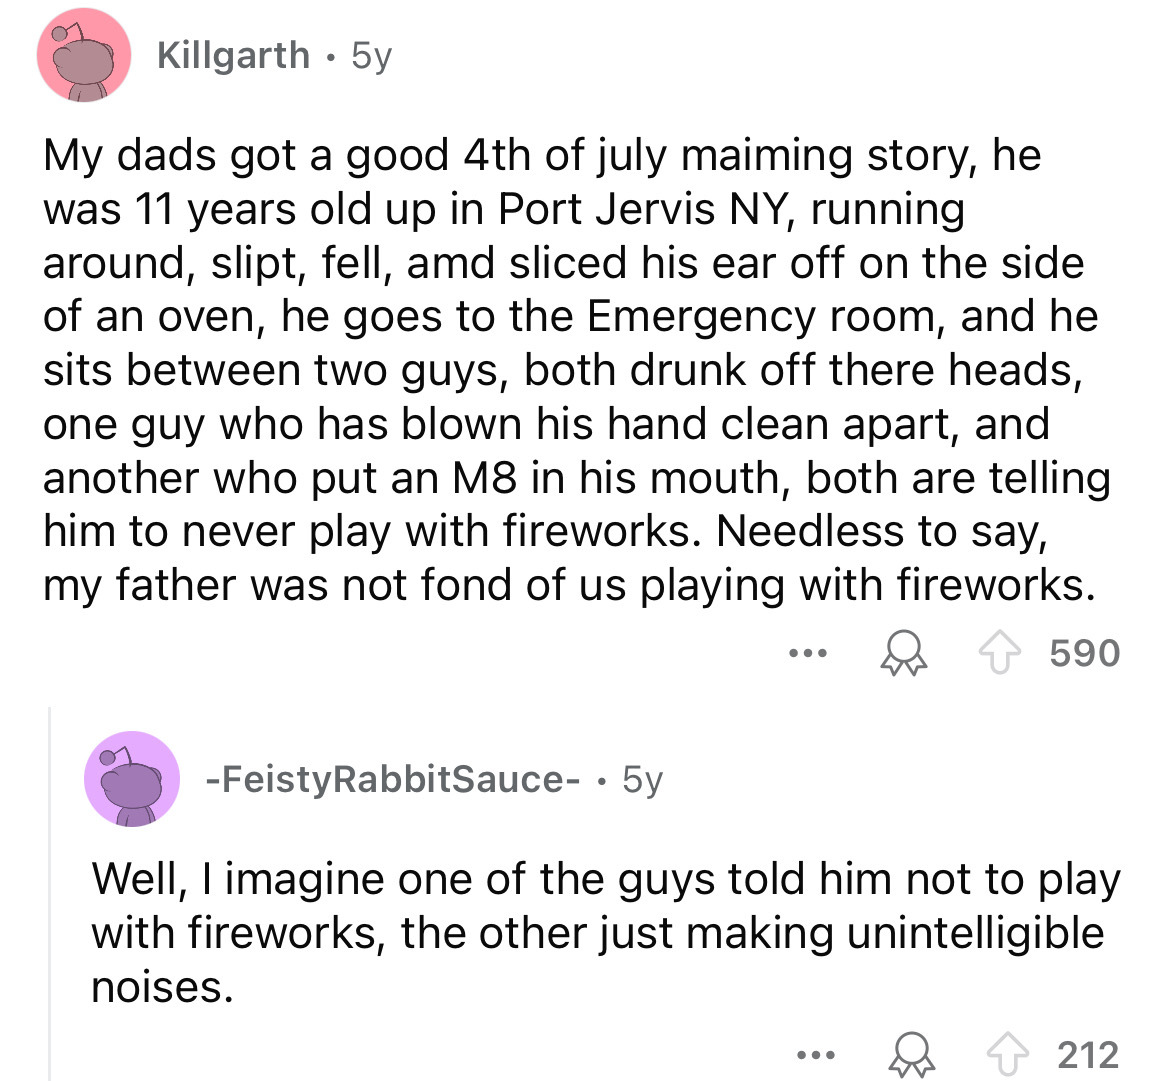 screenshot - Killgarth .5y My dads got a good 4th of july maiming story, he was 11 years old up in Port Jervis Ny, running around, slipt, fell, amd sliced his ear off on the side of an oven, he goes to the Emergency room, and he sits between two guys, bot